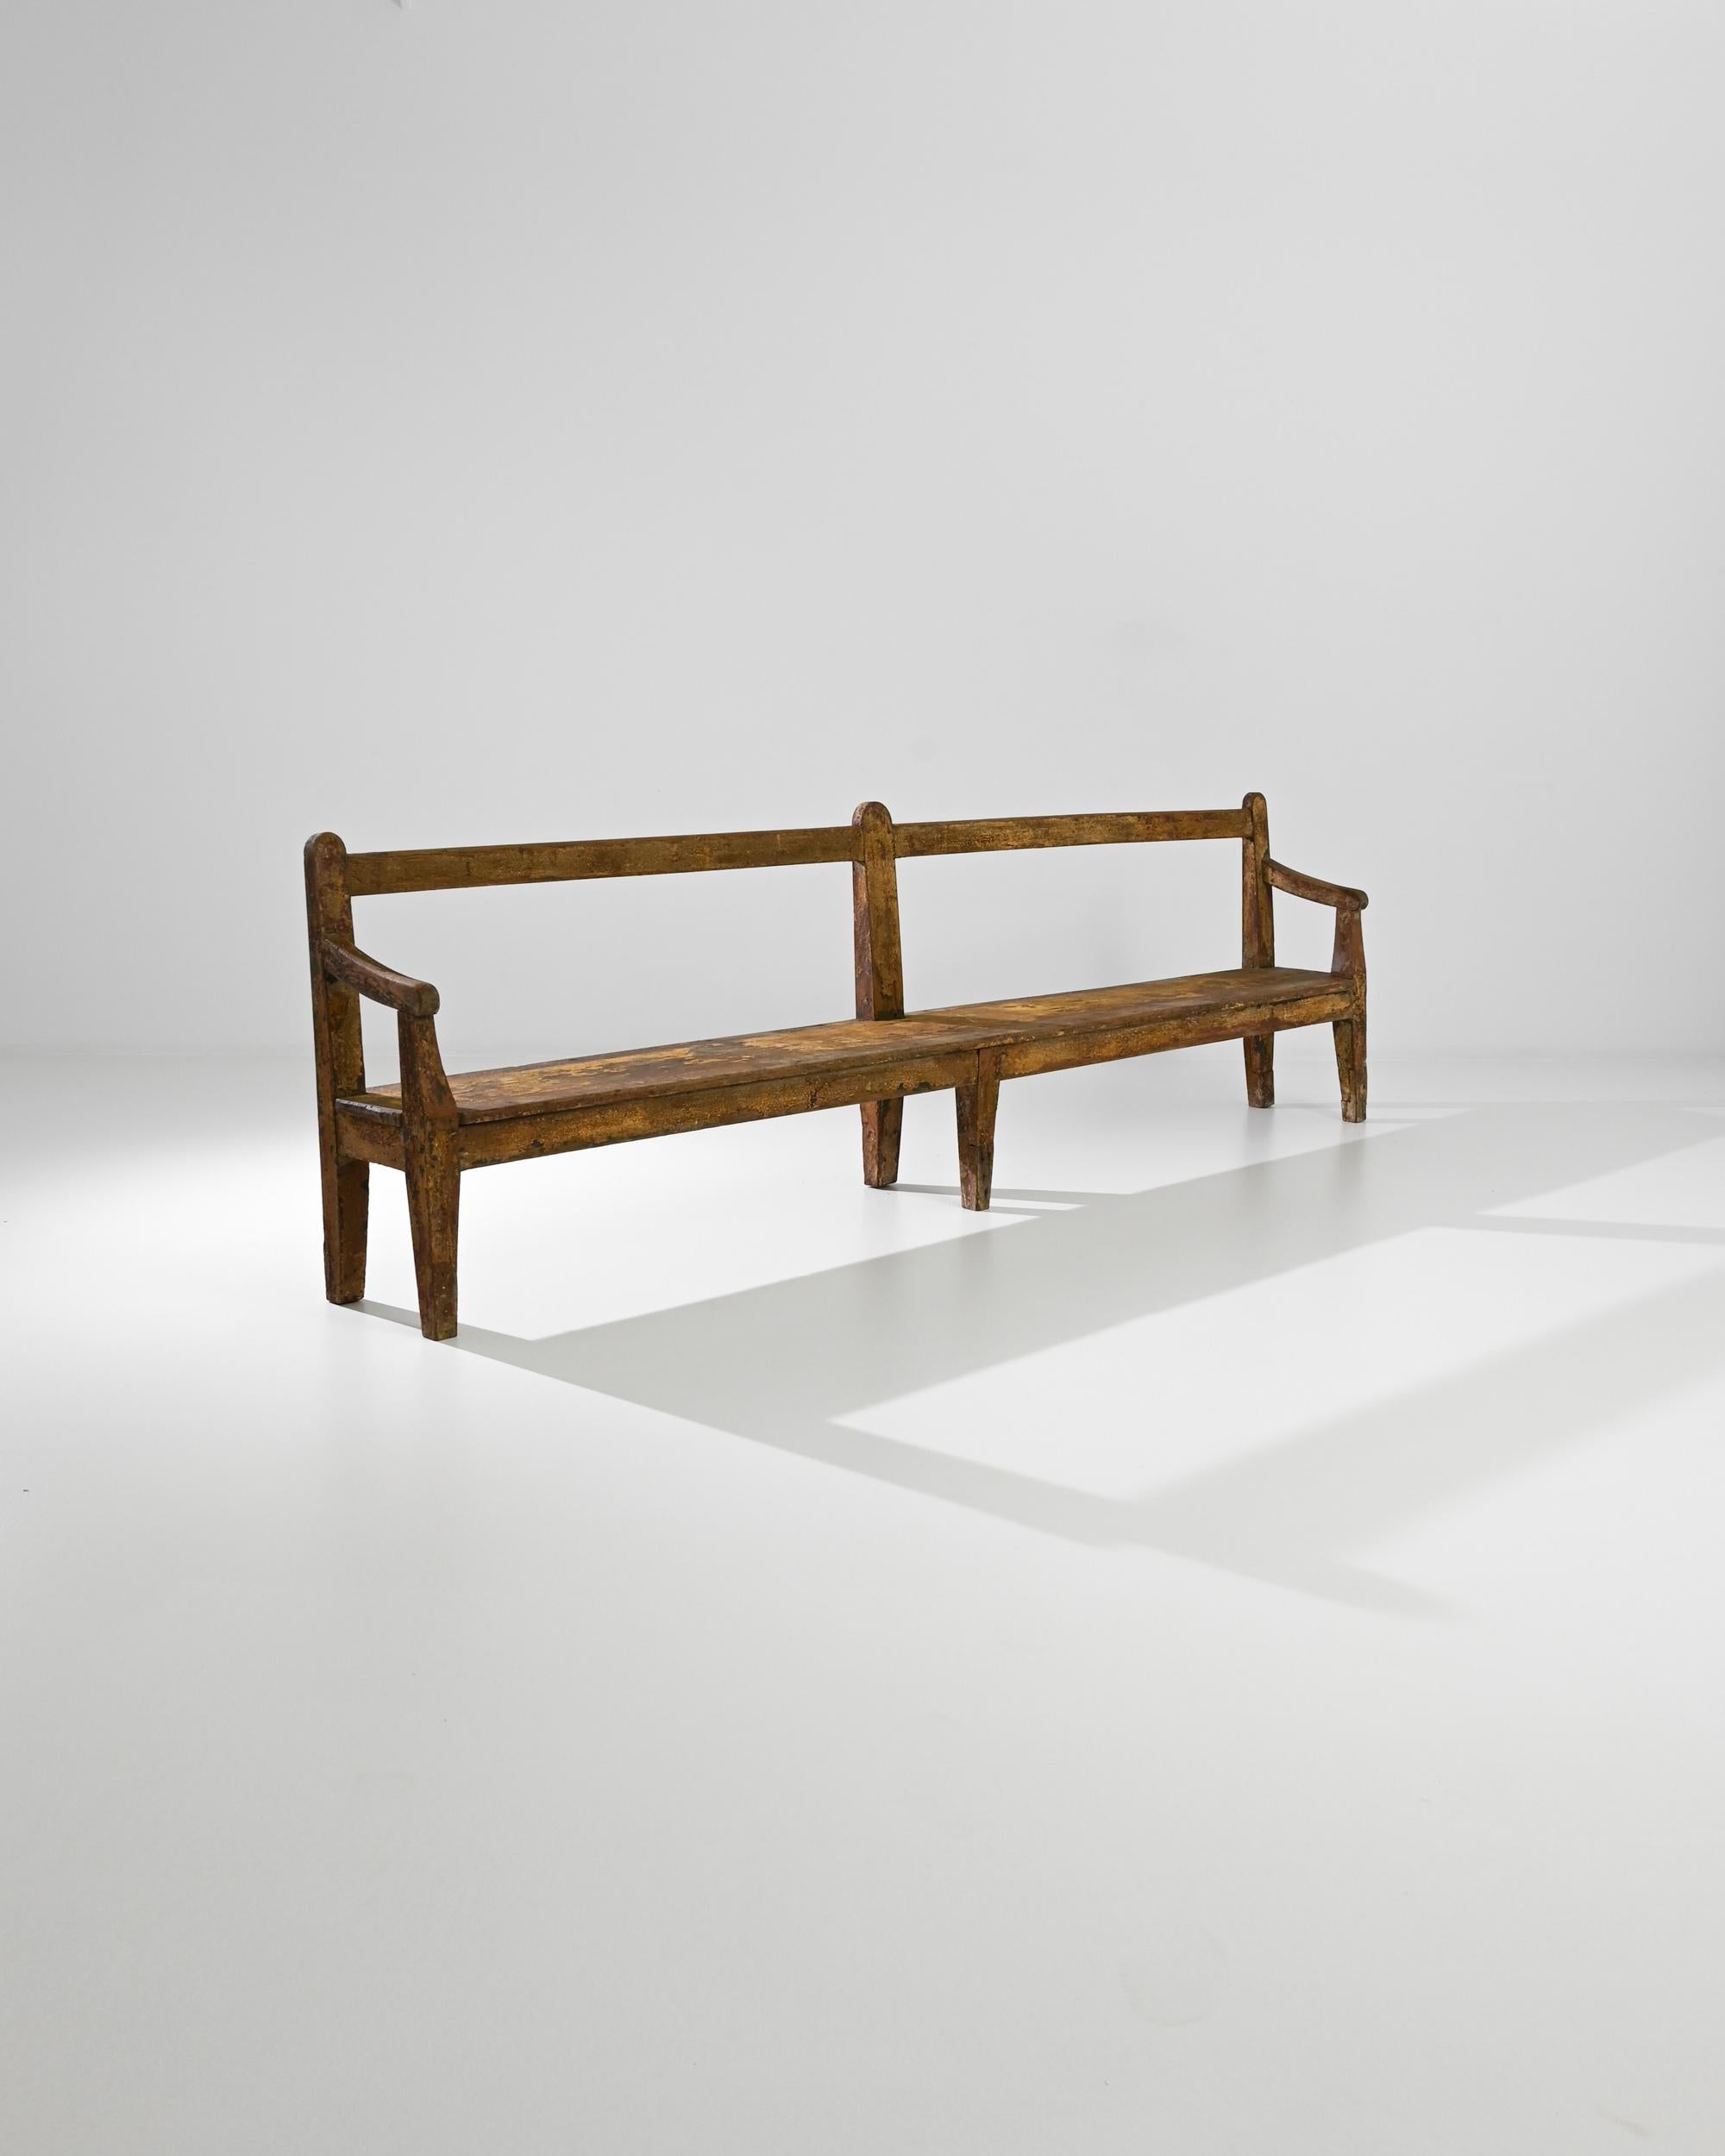 An antique wooden bench from 19th century France. Reminiscent of a park bench or church pew, the silhouette offers a communal space which welcomes one and all to sit. Tapered legs and slanted armrests add refinement; the absence of back-slats or